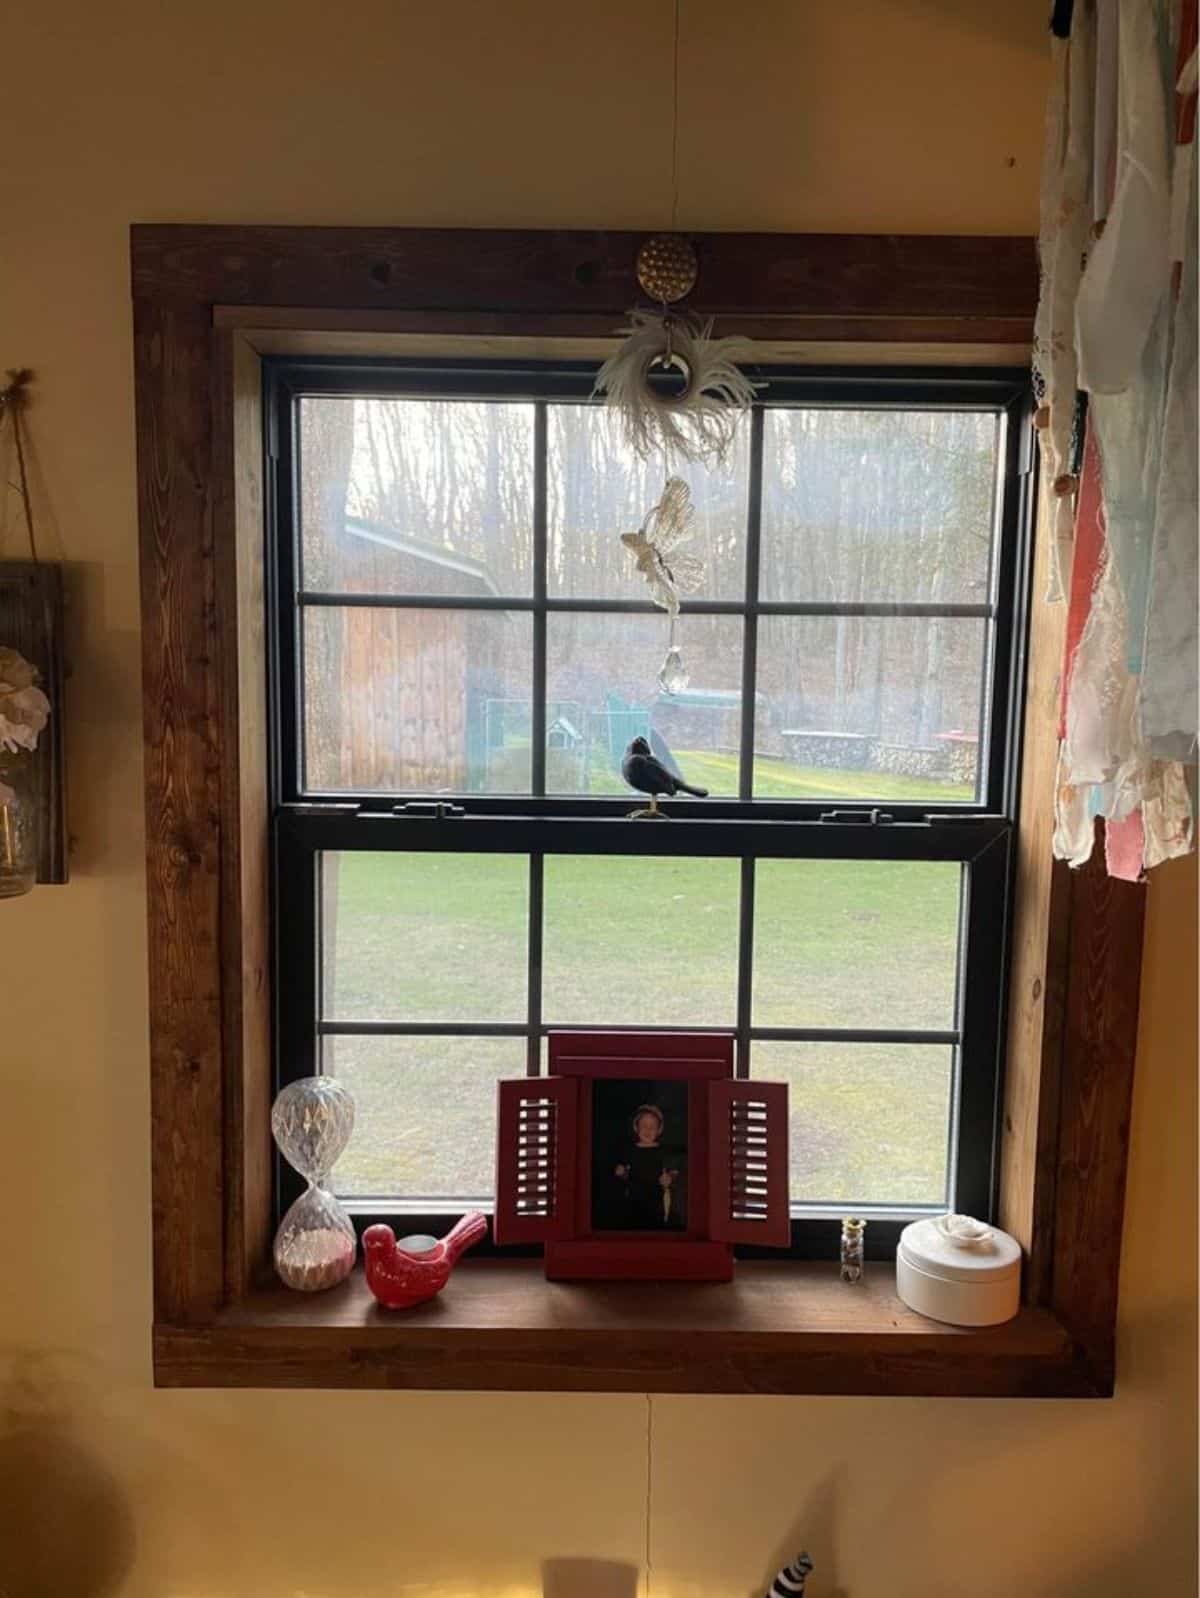 Huge window to make the house brighter